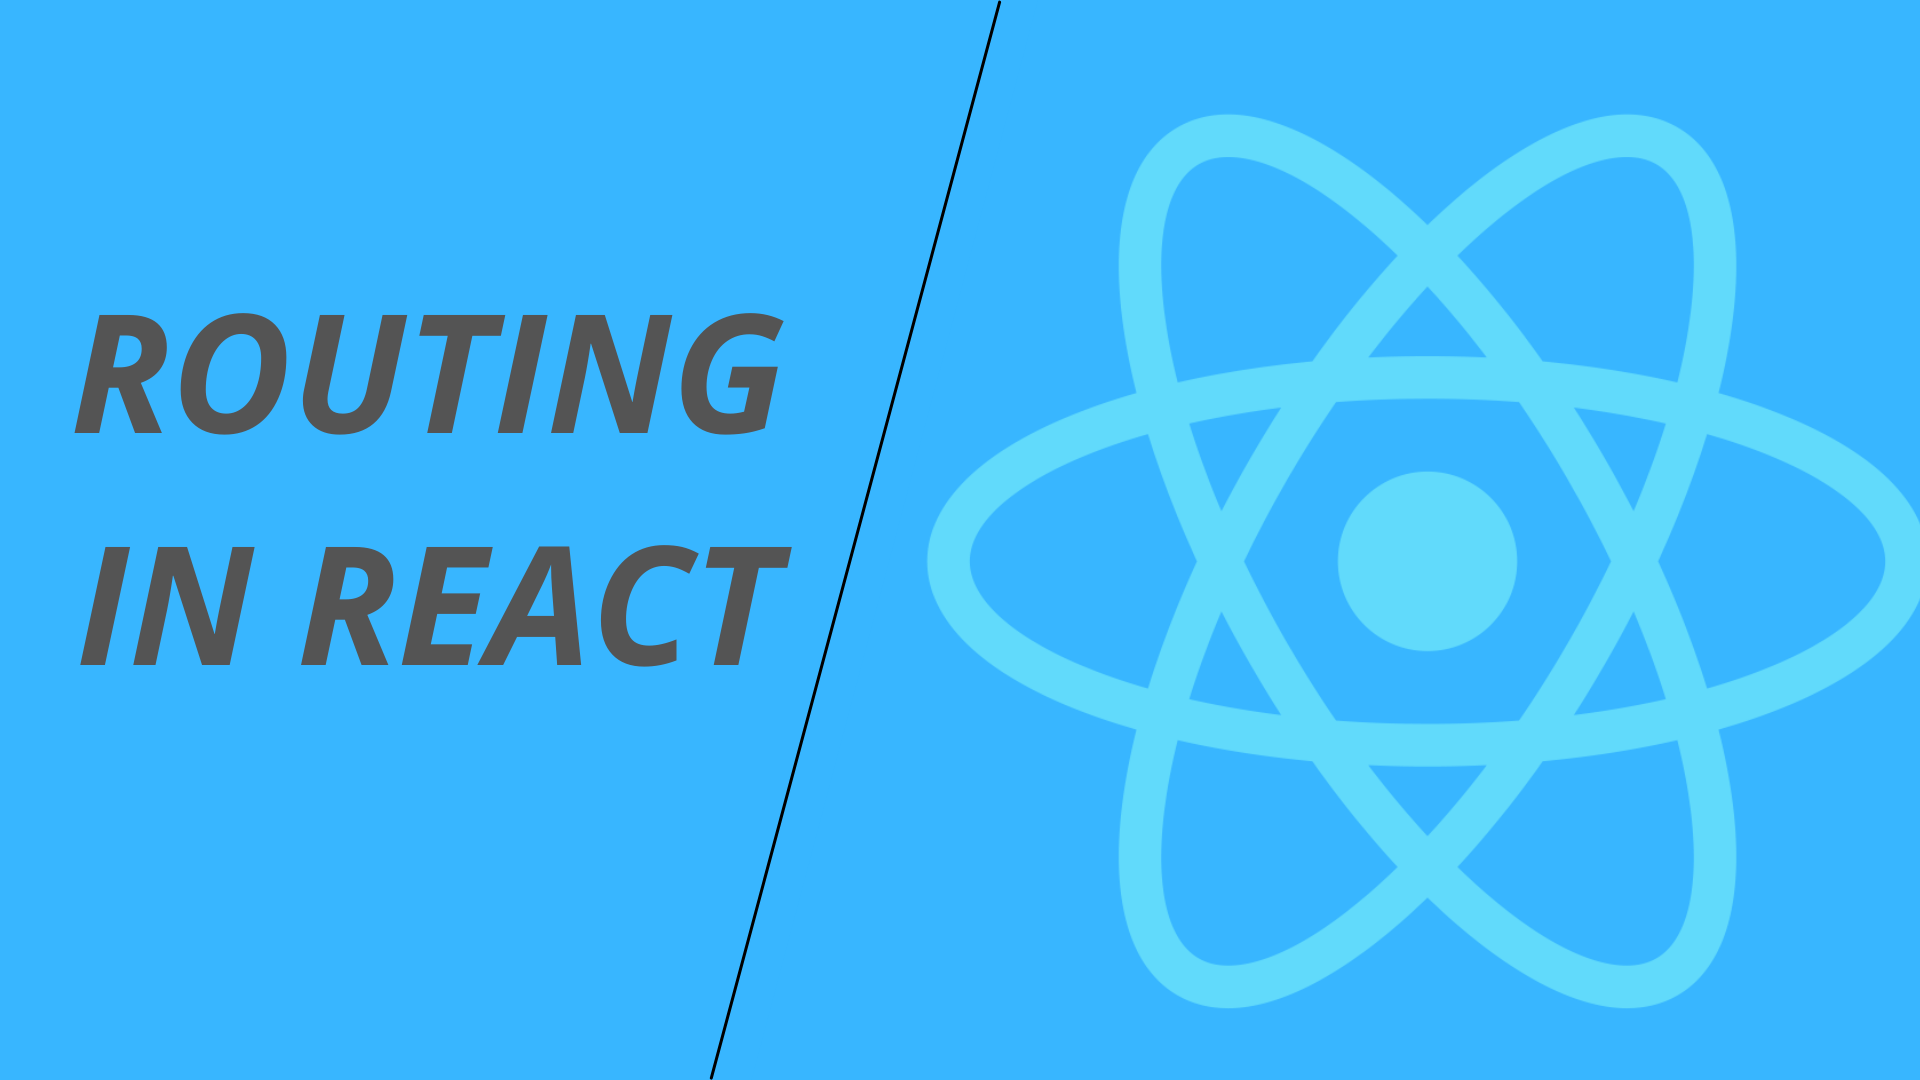 Create a Simple App to Understand Routing in React